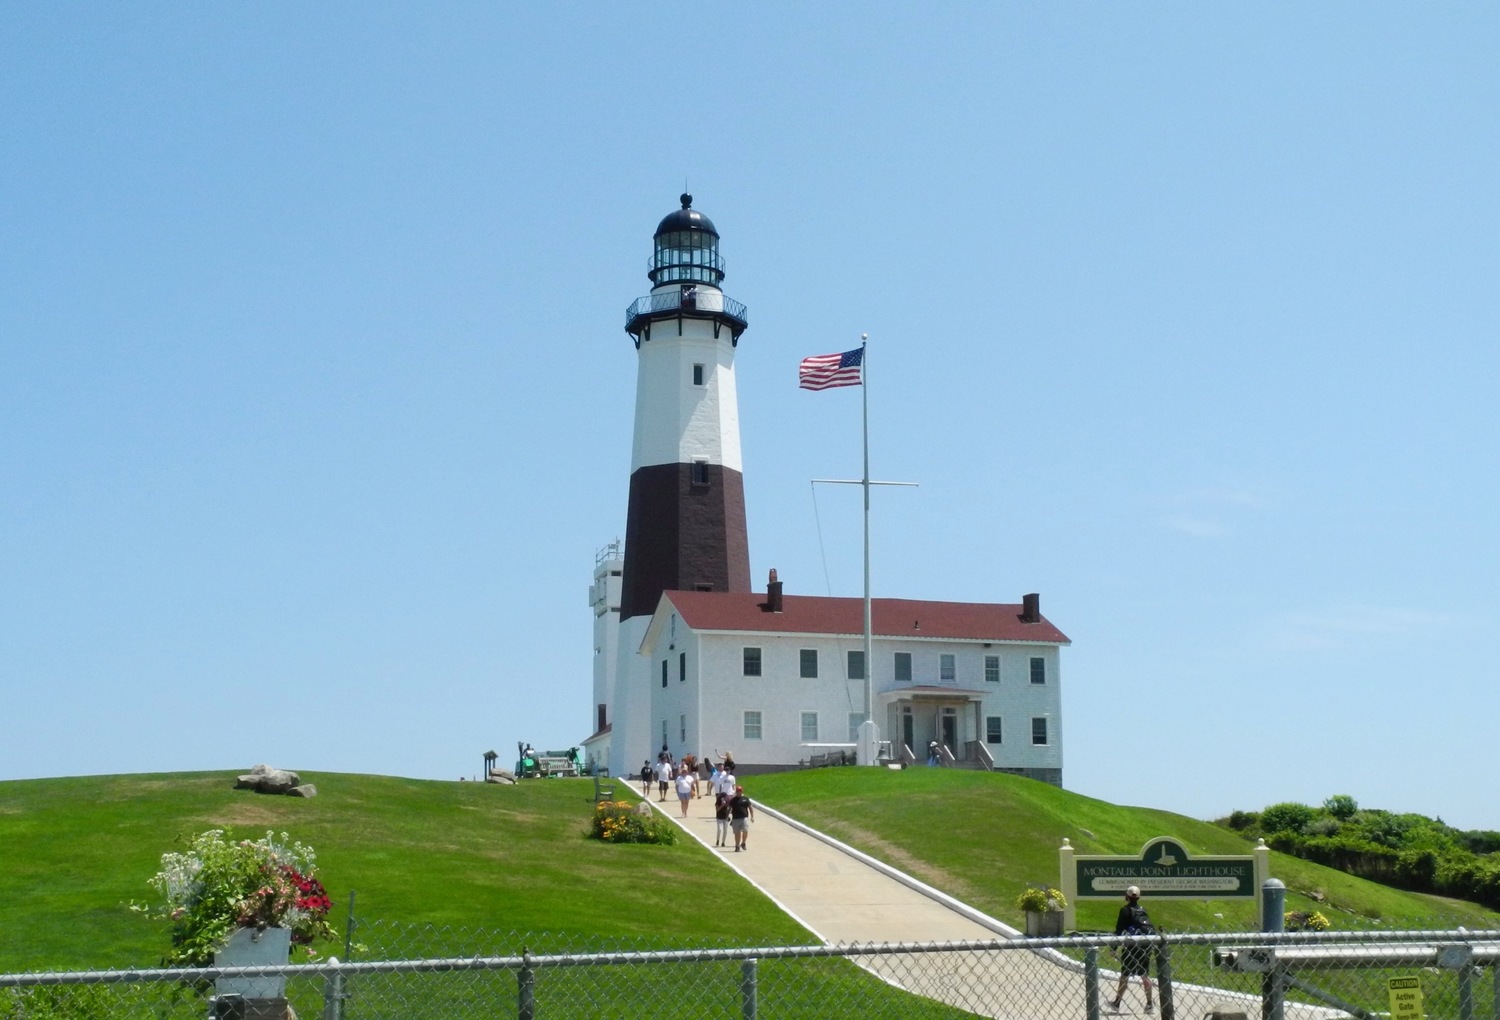 The Montauk Lighthouse and museum will offer free admission on October 12 for 